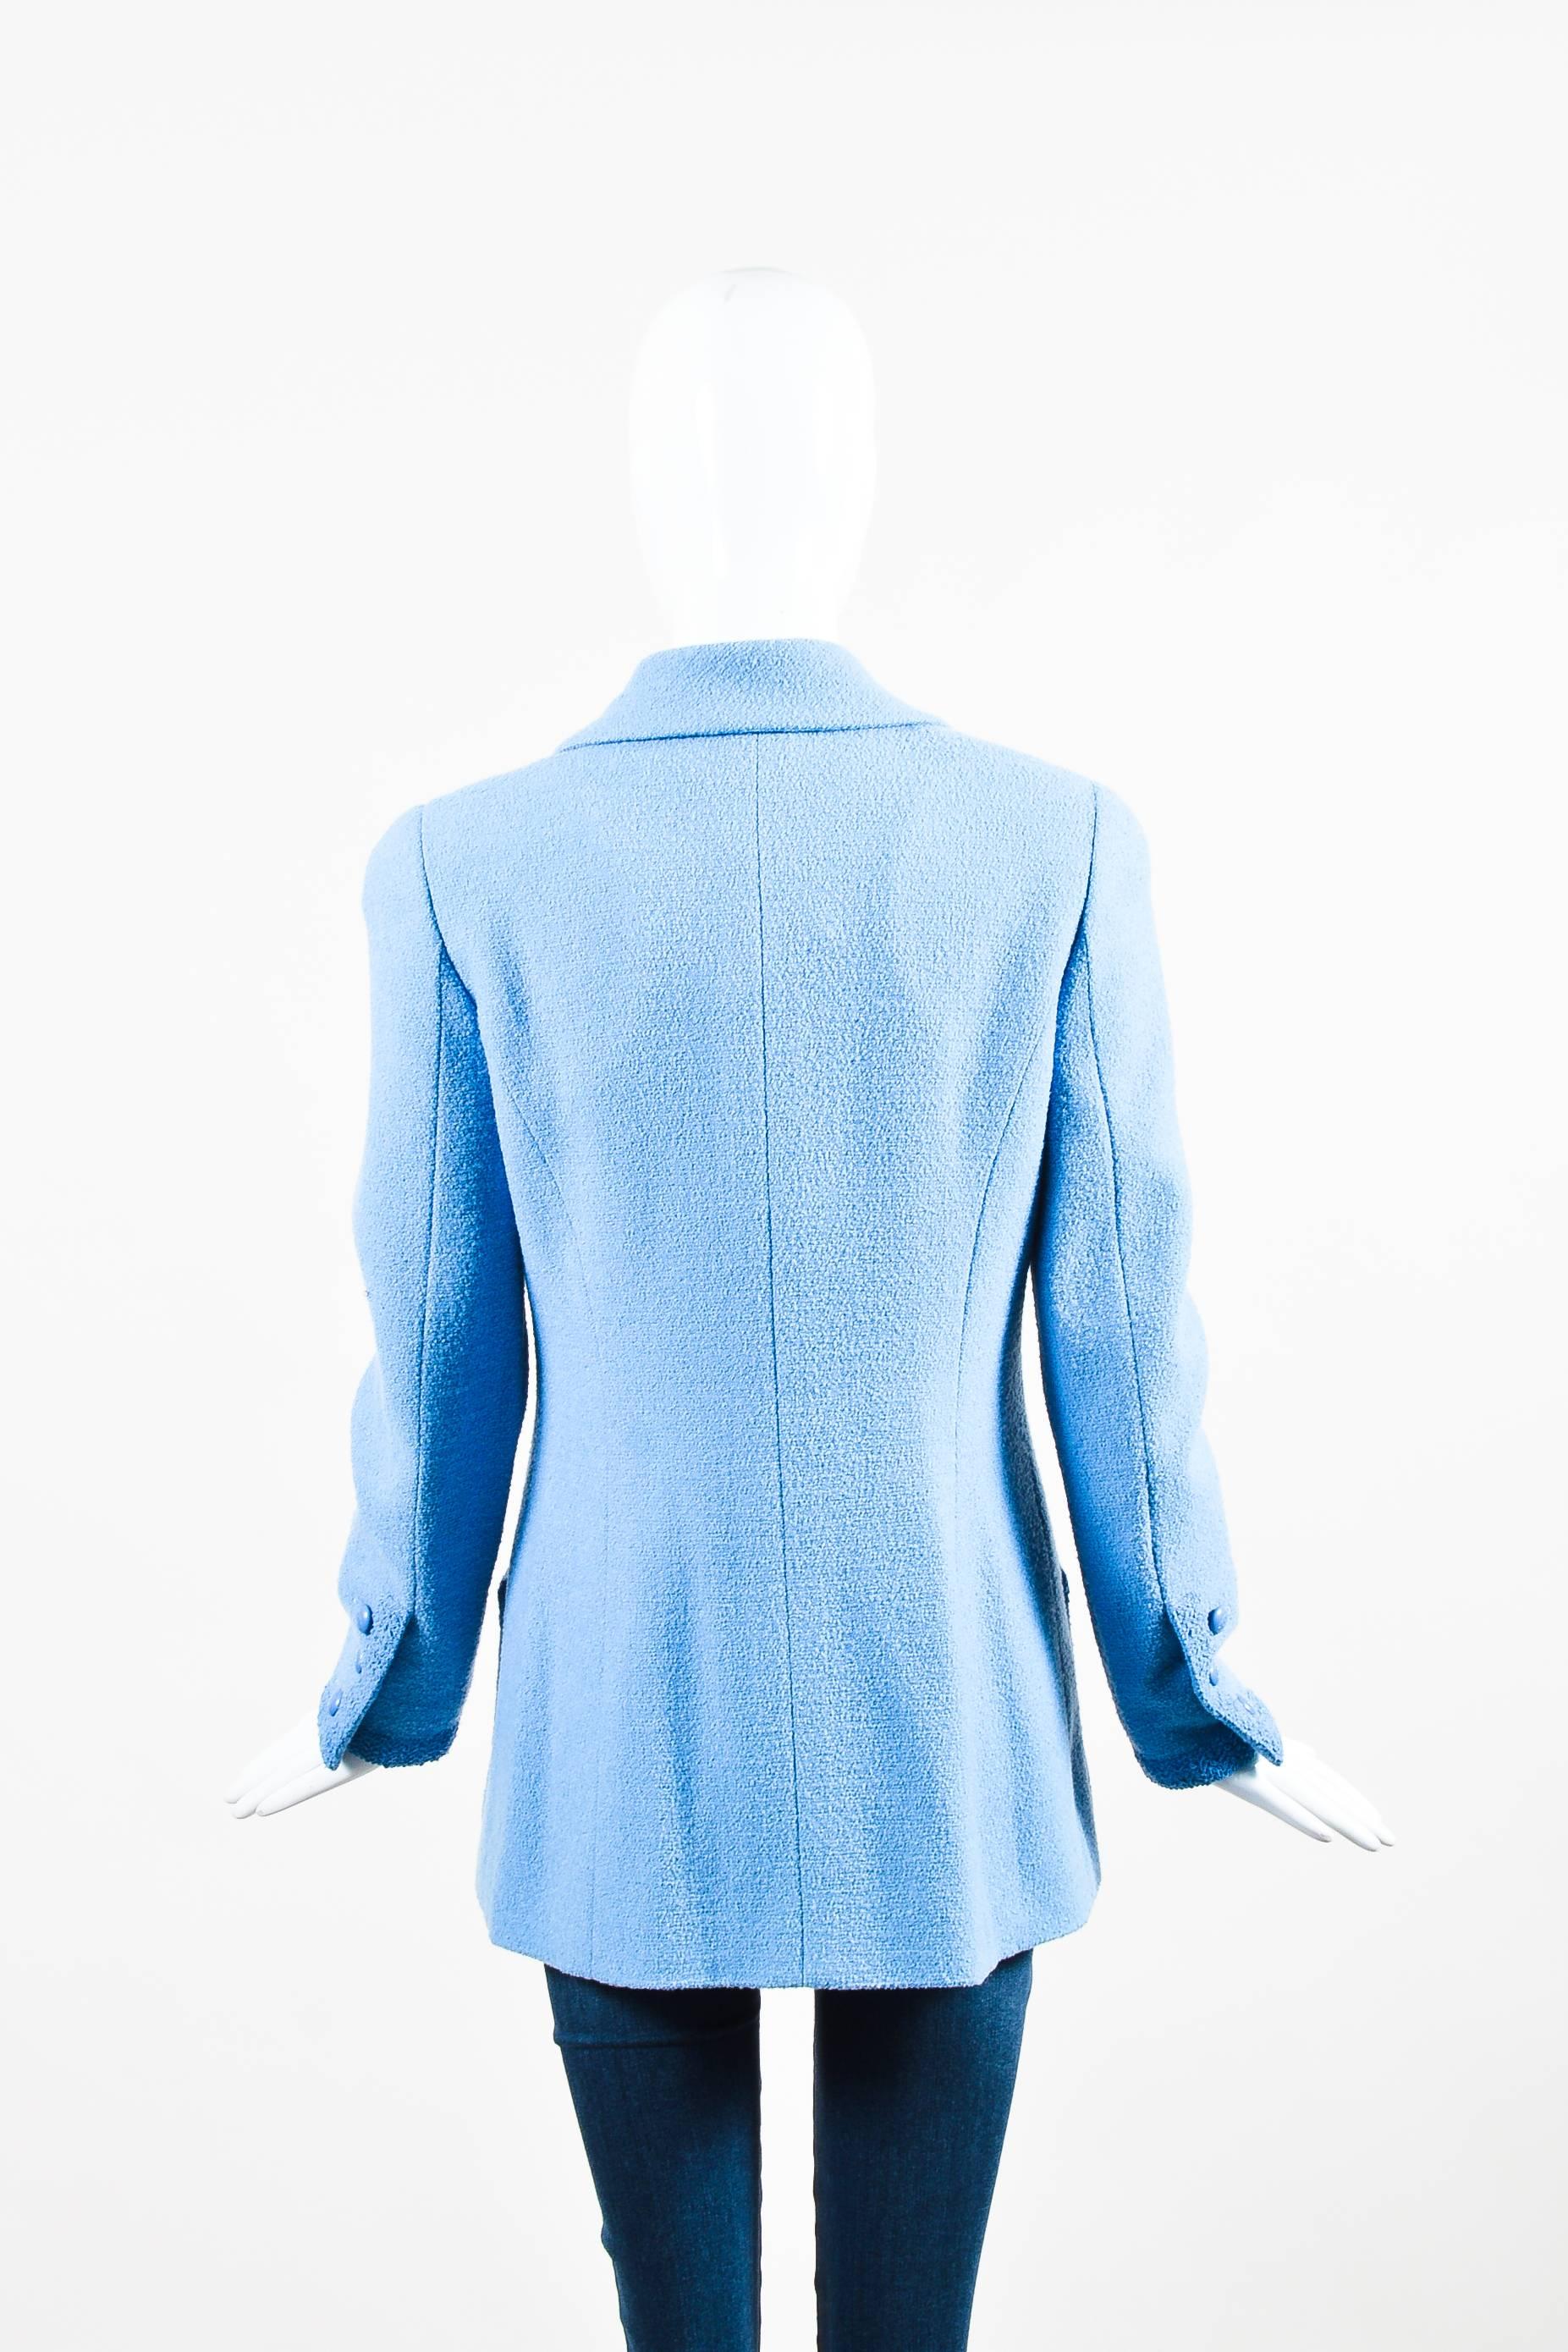 Chanel Boutique Baby Blue Wool Double Breasted Four Pocket LS Jacket SZ 40 In Good Condition For Sale In Chicago, IL